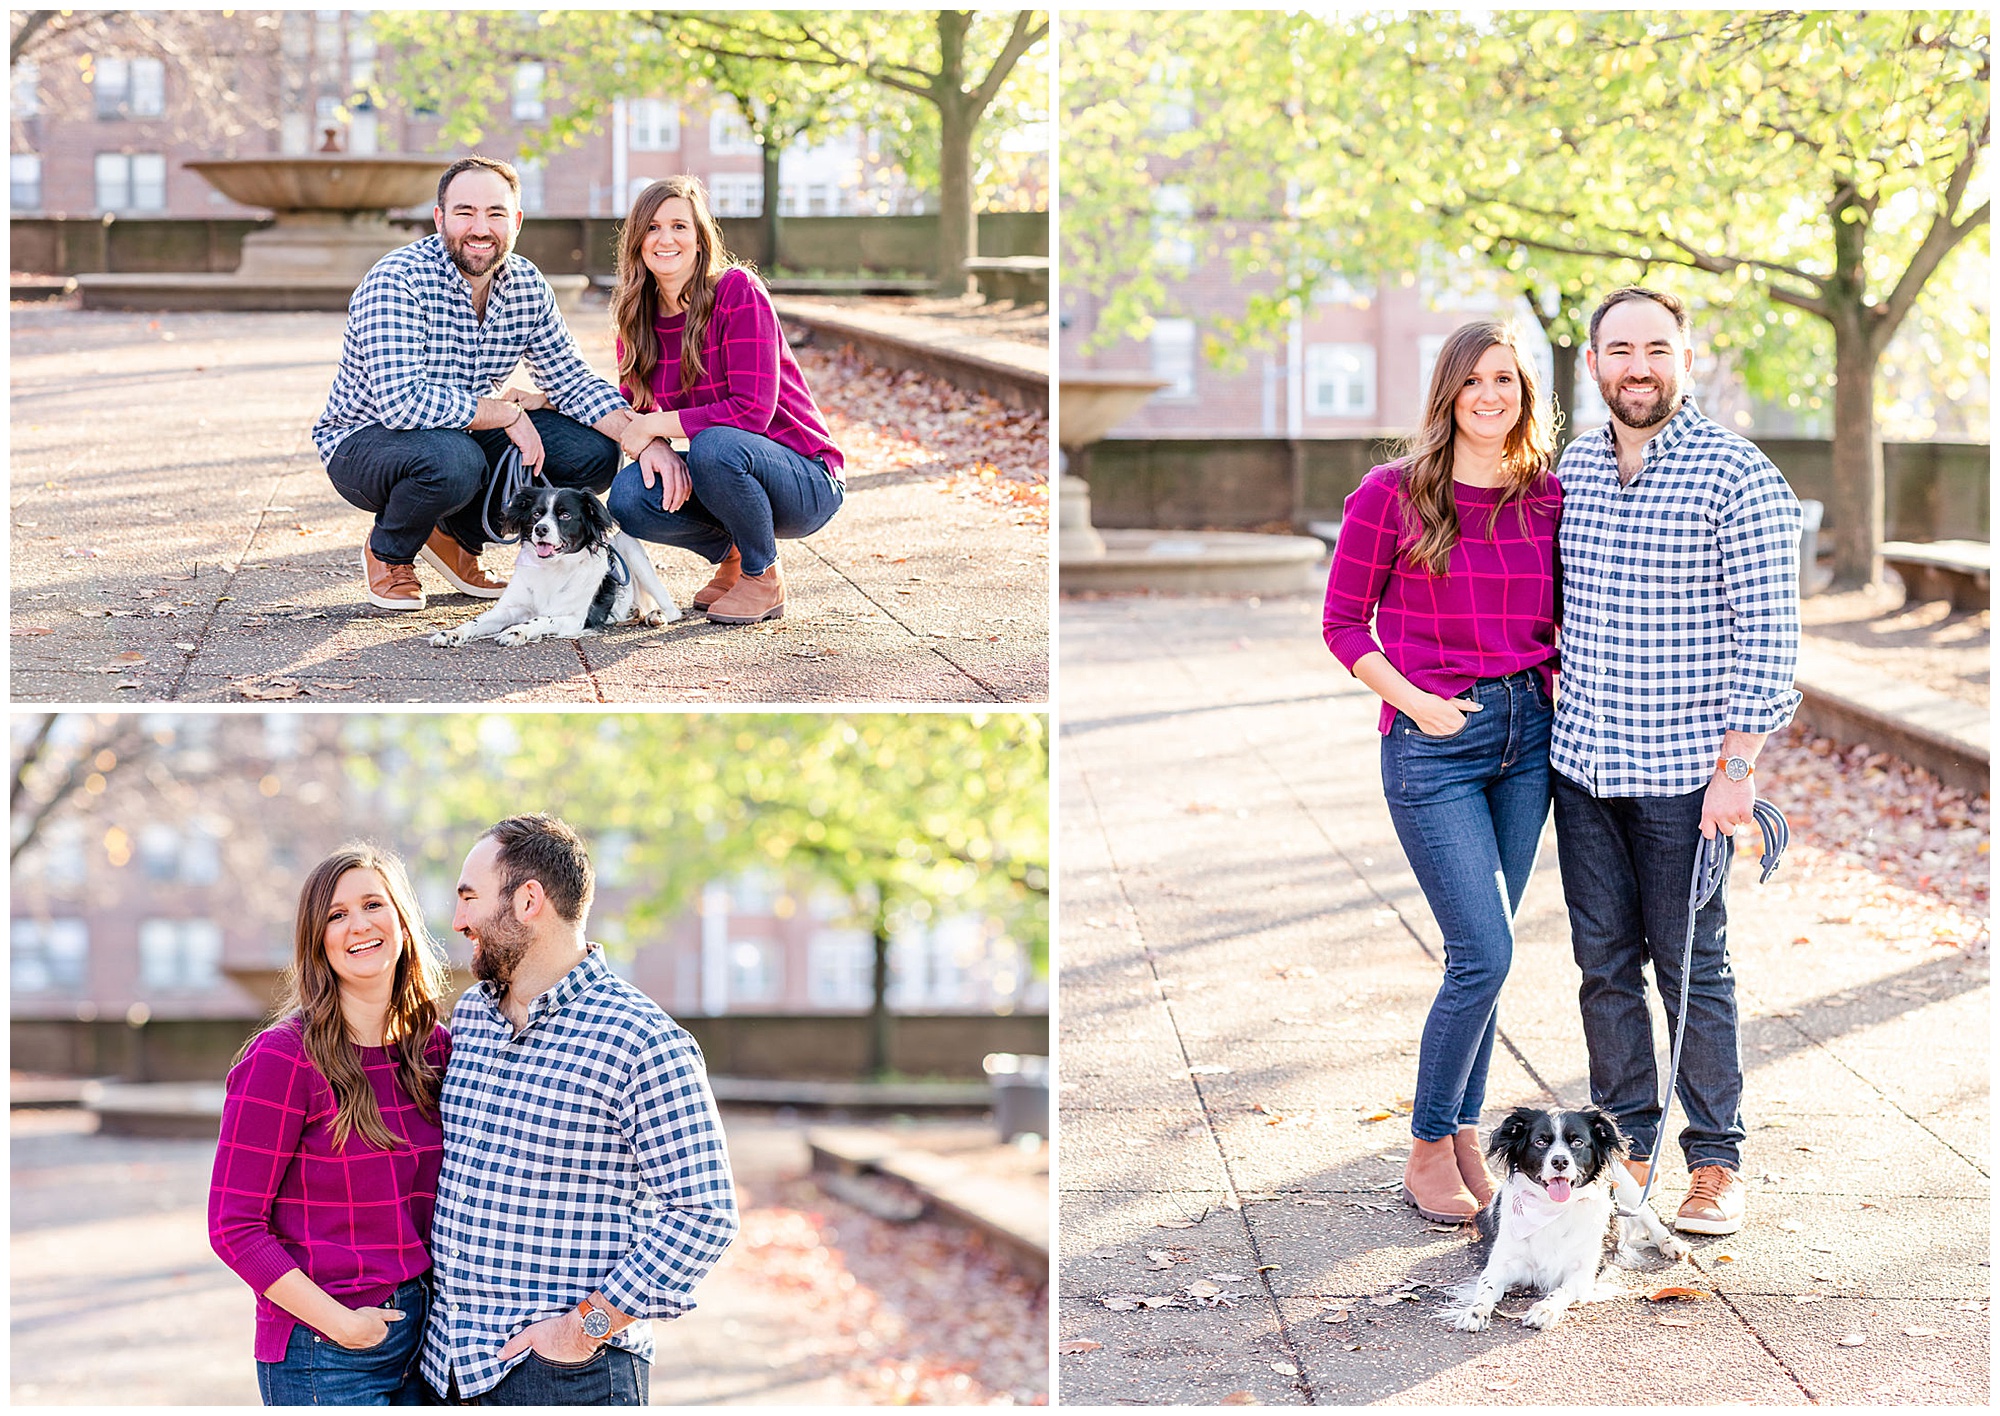 Meridian Hill Park engagement session, Meridian Hill Park DC, DC engagement photography, DC engagement photos, DC engagement session, DC engagement photographer, DC proposal photographer, DC wedding photographer, autumn engagement photos, Rachel E.H. Photography, couple crouching down to pet dog, couple smiling, dog at couples feet